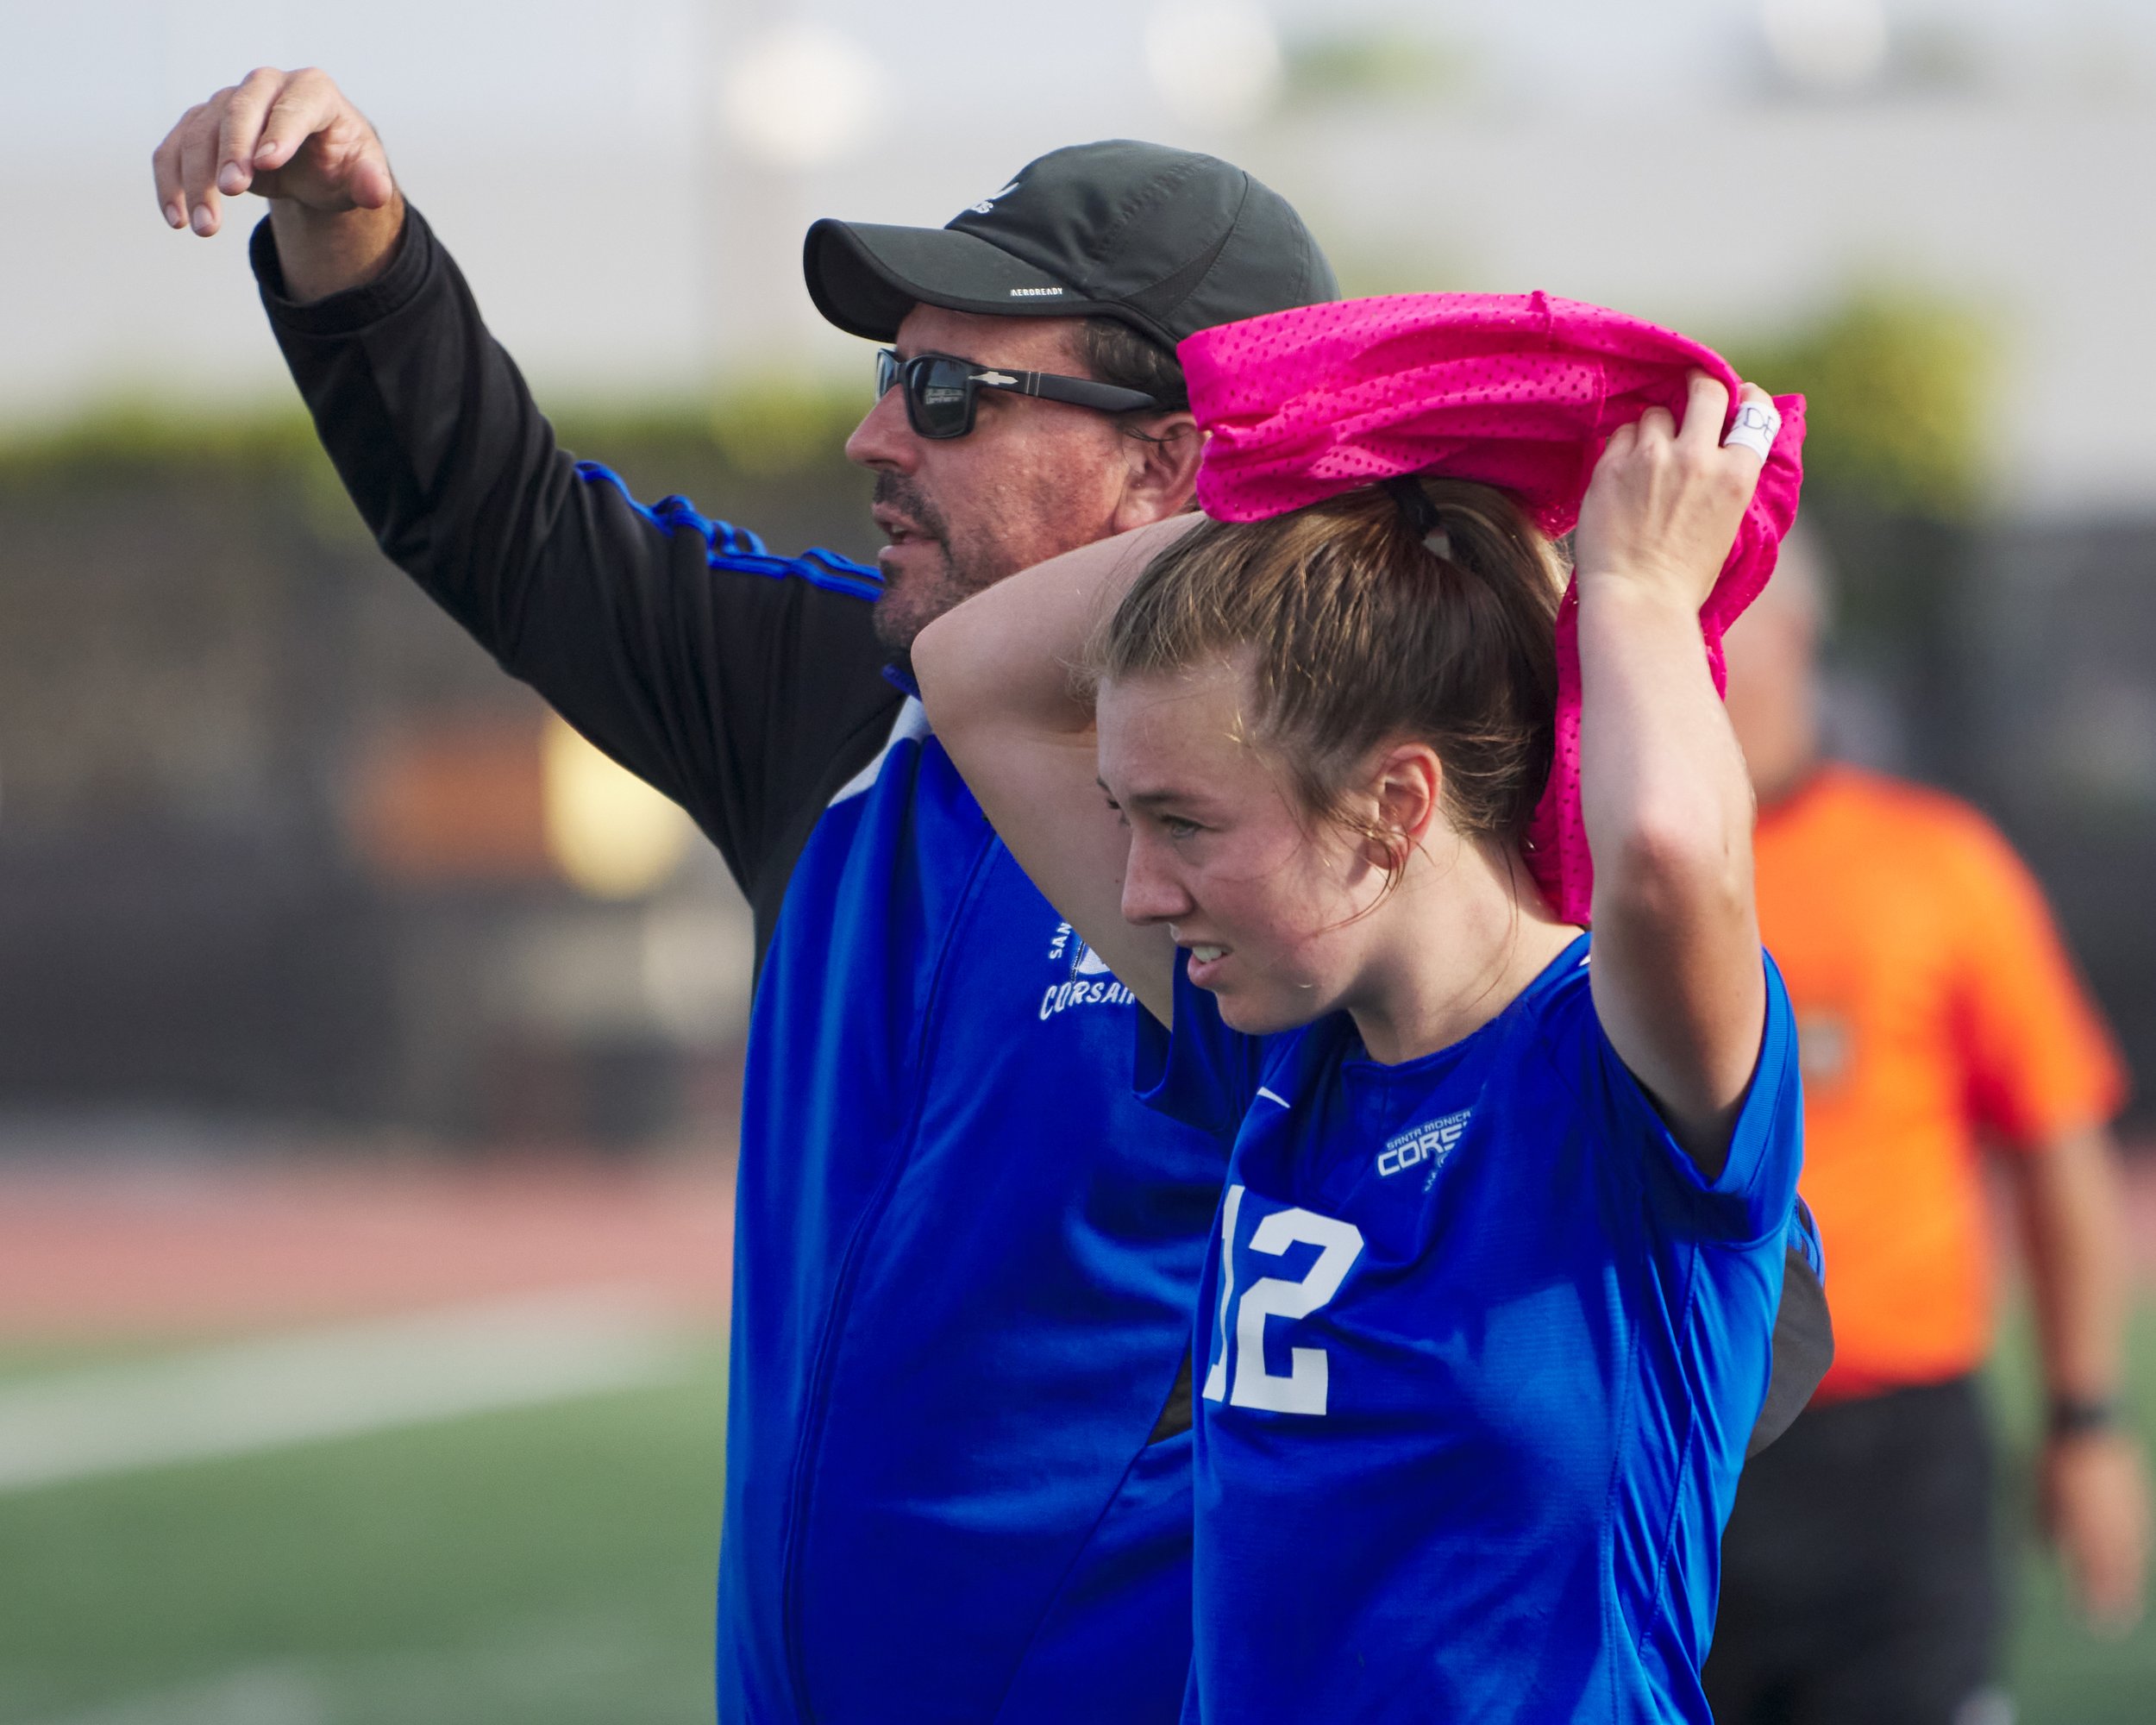  Santa Monica College Corsairs Women's Soccer Head Coach Aaron Benditson calls to send Eden Hotch, removing her vest, as a replacement during the women's soccer match against the Glendale Community College Vaqueros on Friday, Oct. 21, 2022, at Corsai